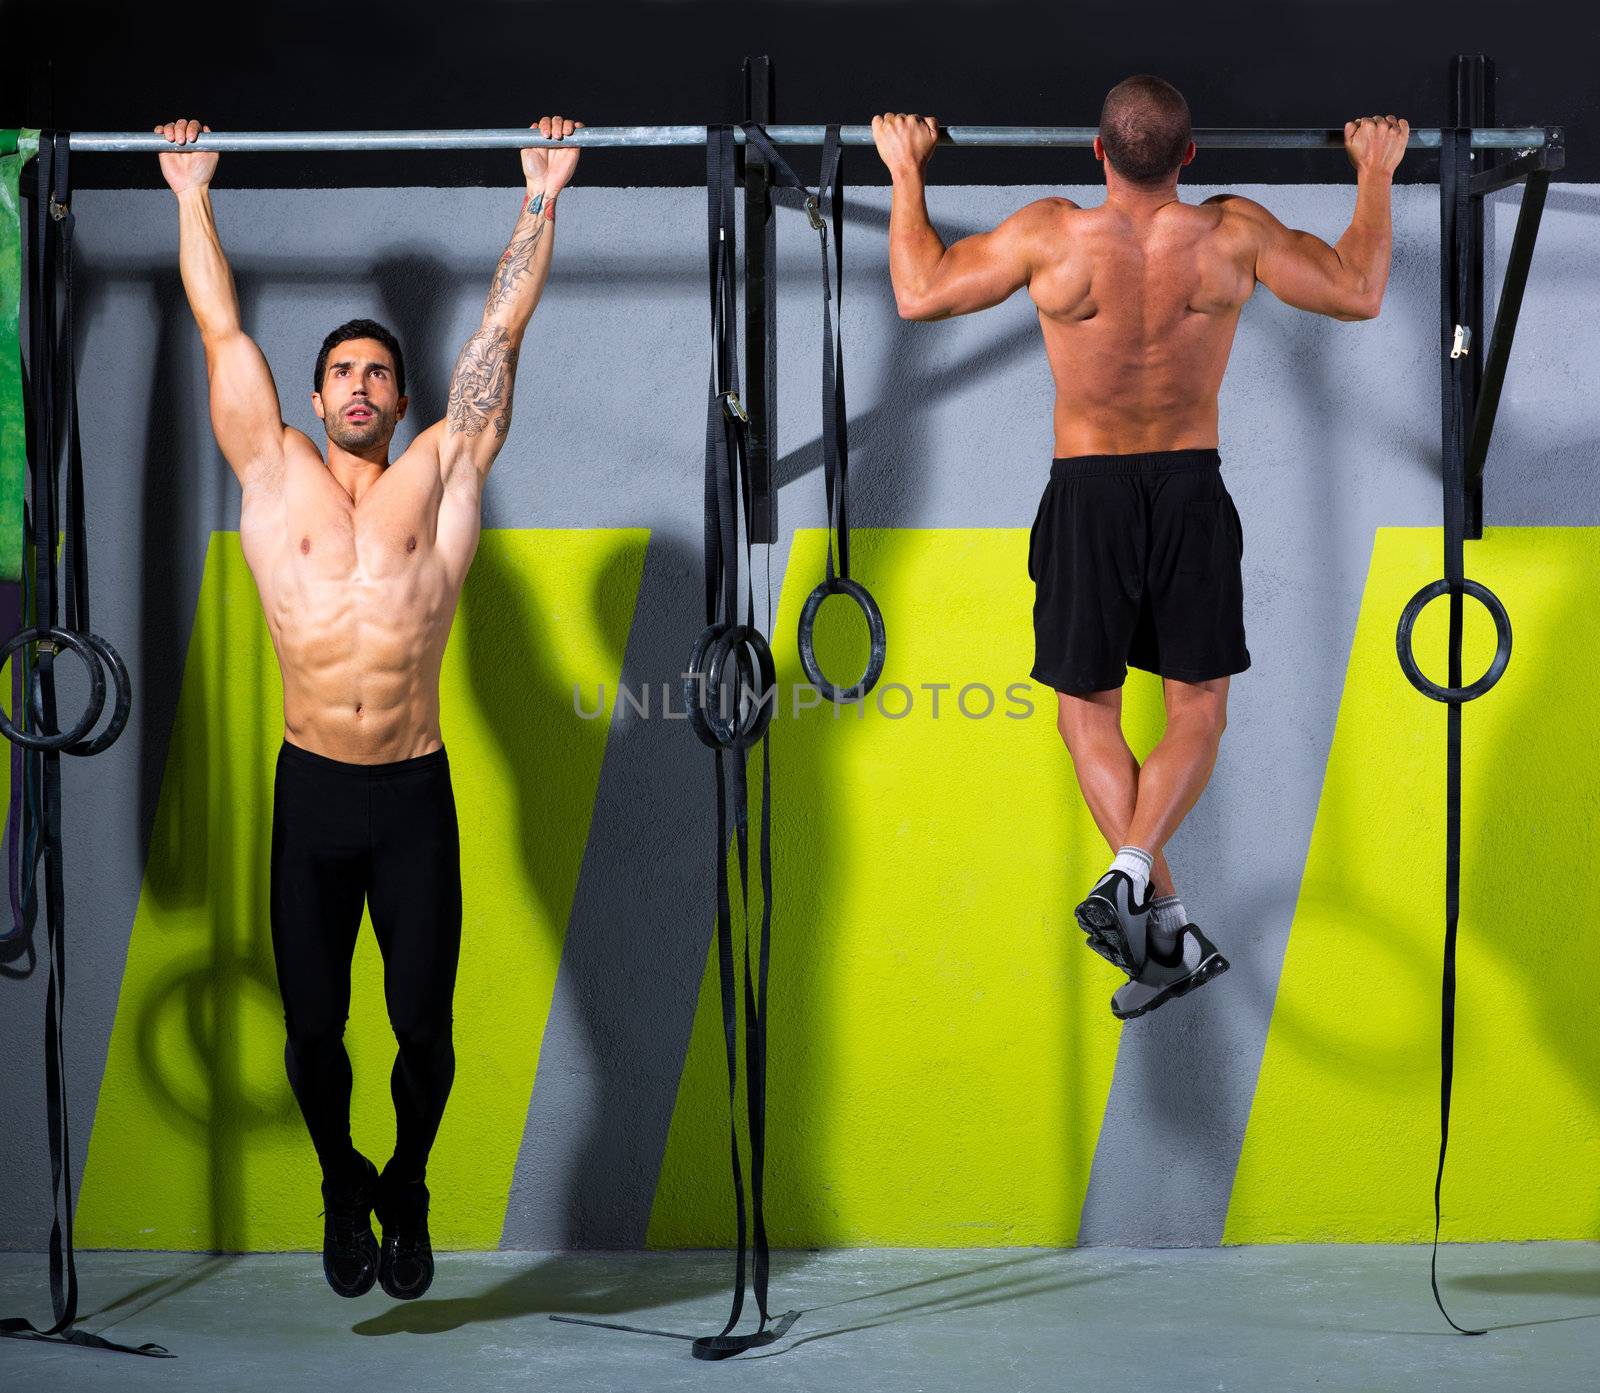 Crossfit toes to bar men pull-ups 2 bars workout exercise at gym